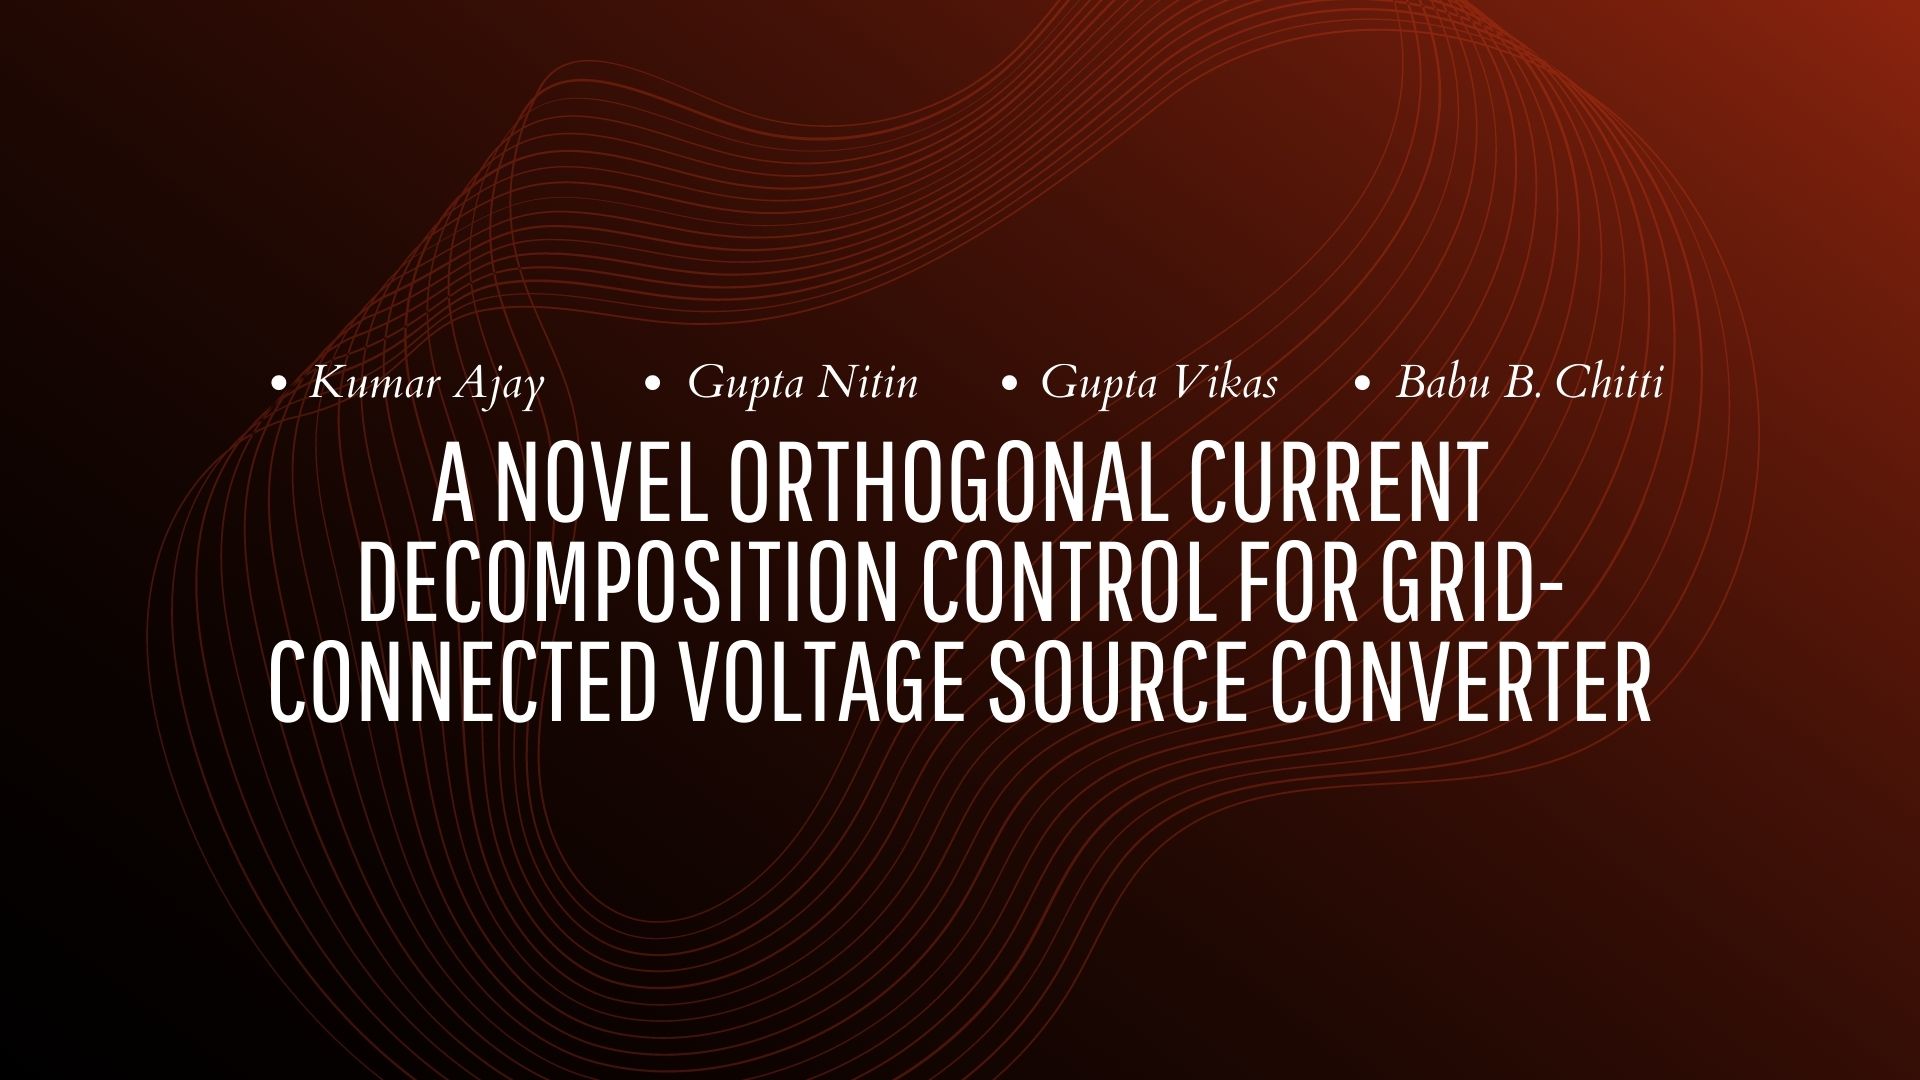 A Novel Orthogonal Current Decomposition Control for Grid-Connected Voltage Source Converter